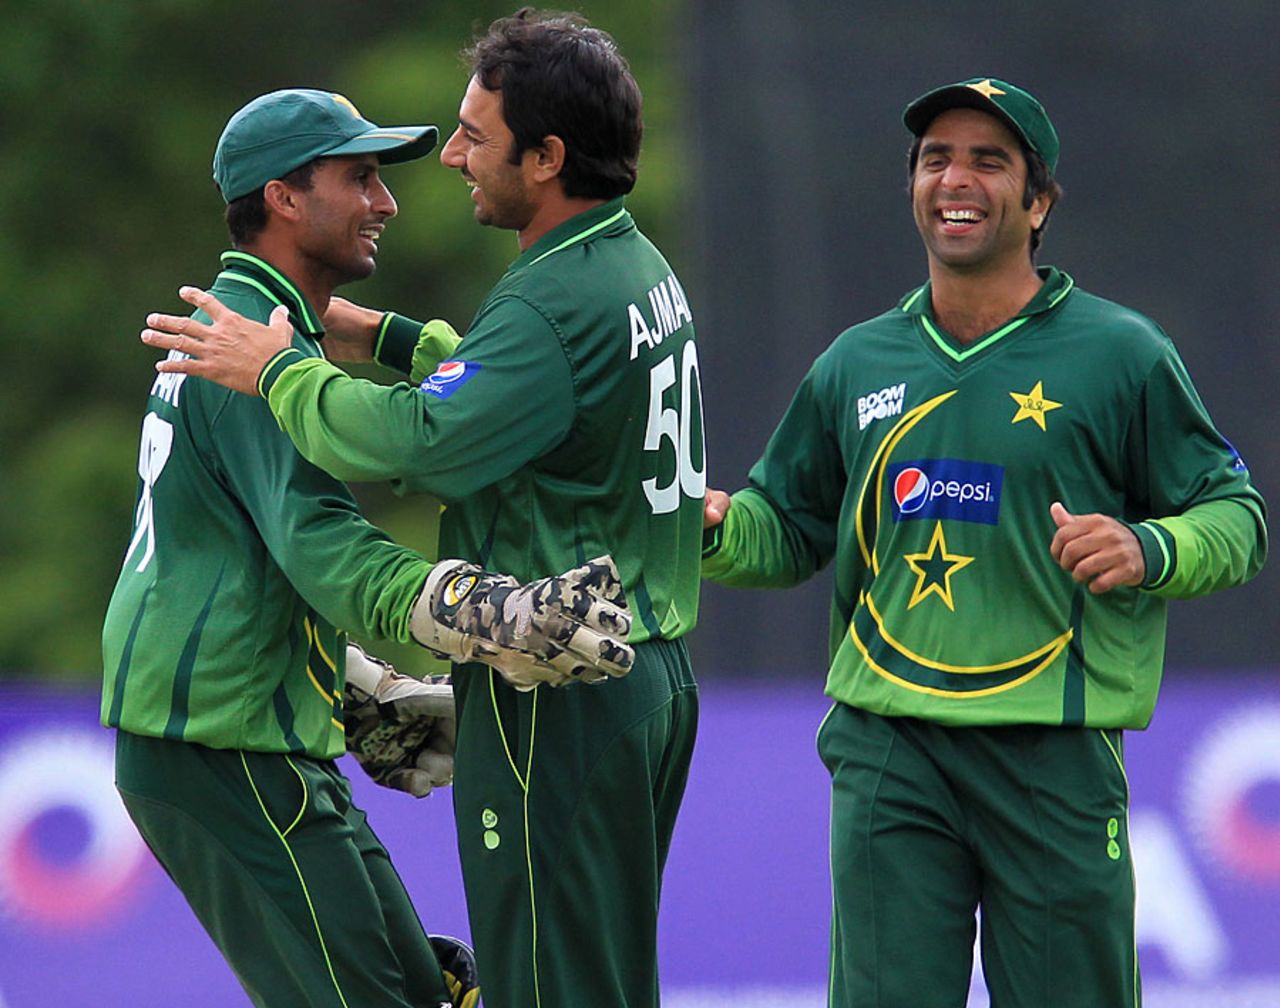 Saeed Ajmal picked up four wickets, conceding 35 runs from his 10 overs, Ireland v Pakistan, 2nd ODI, Belfast, May 30, 2011